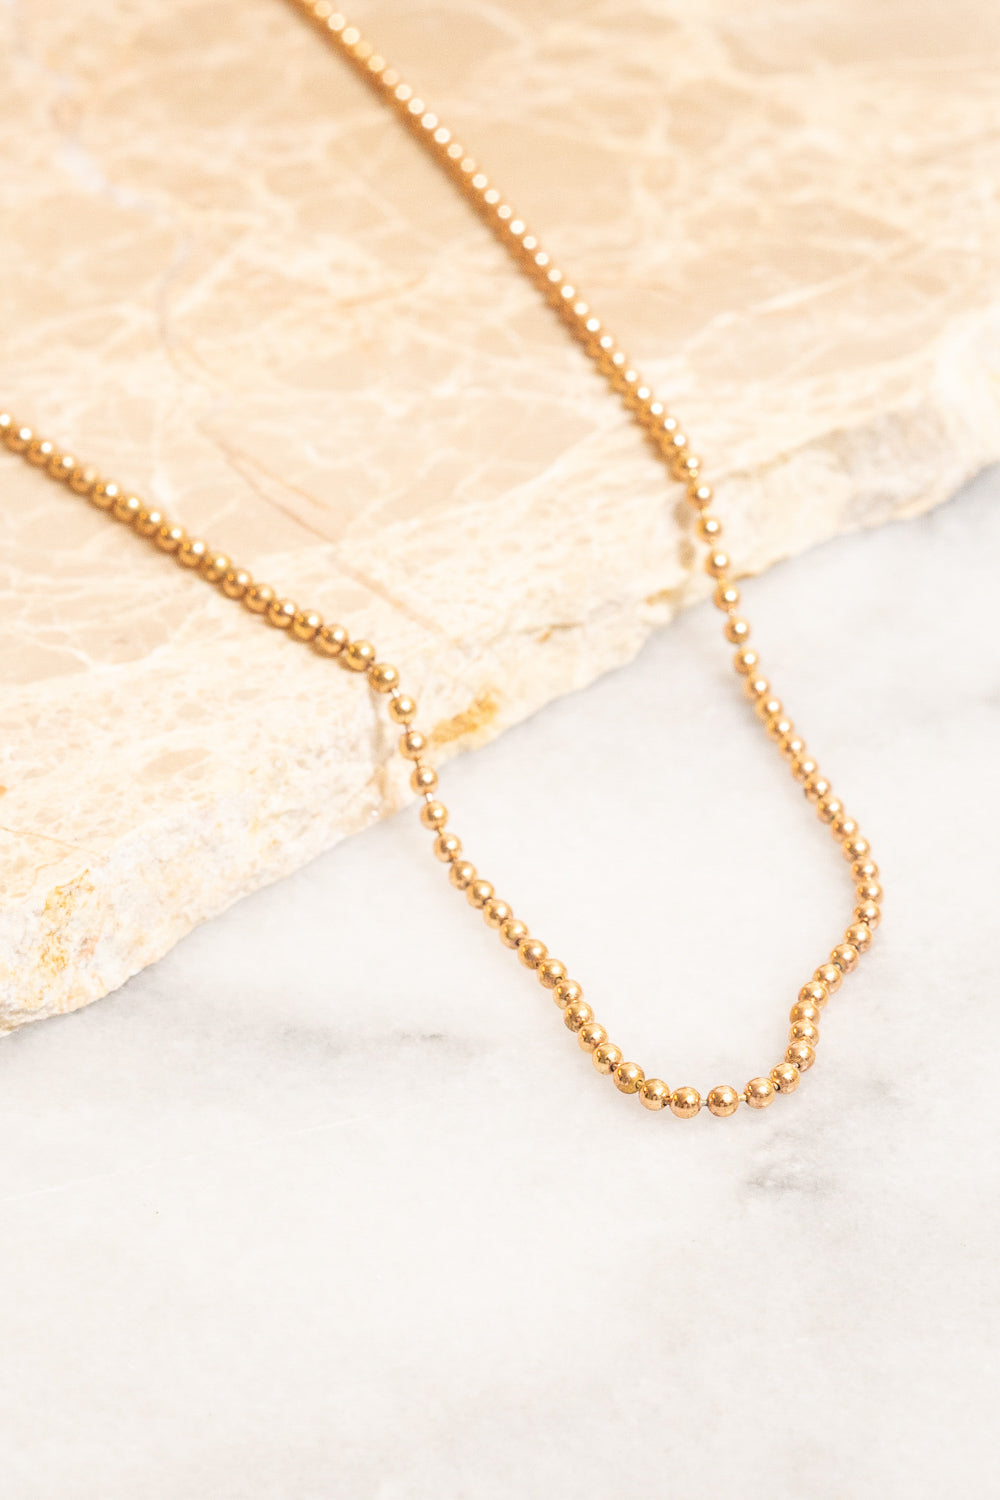 Baby Ball Chain Necklace 14K Gold Filled / 1mm (Very dainty) / 18 inch